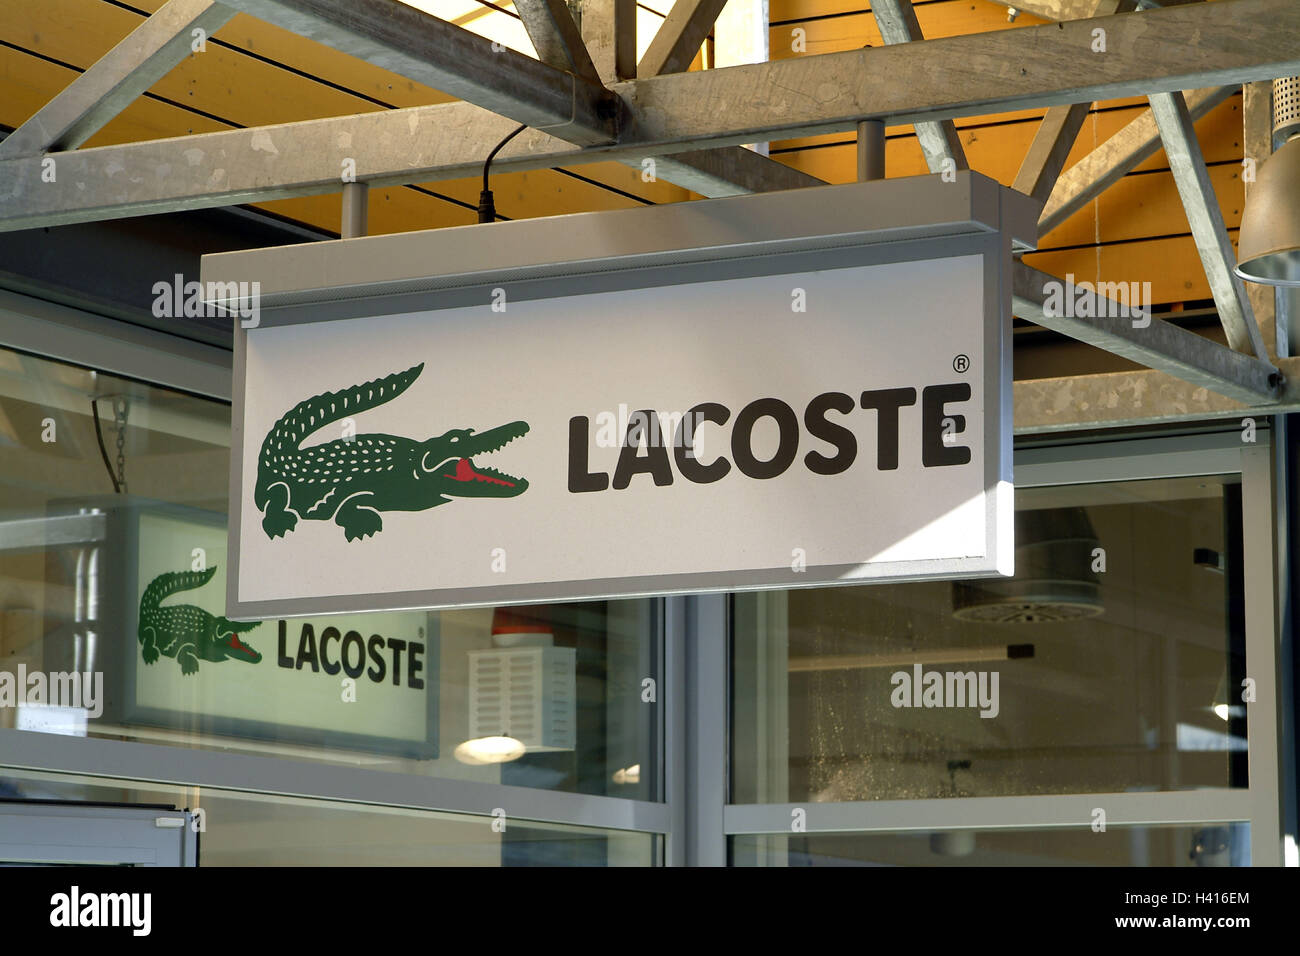 Business, passage, company plaque, Lacoste only editorially economy, retail  trade, loading, boutique, sign, fashion, Fashion, trade name, trade name,  company, company name, sign, logo, company logo, designer fashion,  designer-fashion mark, fashion ...